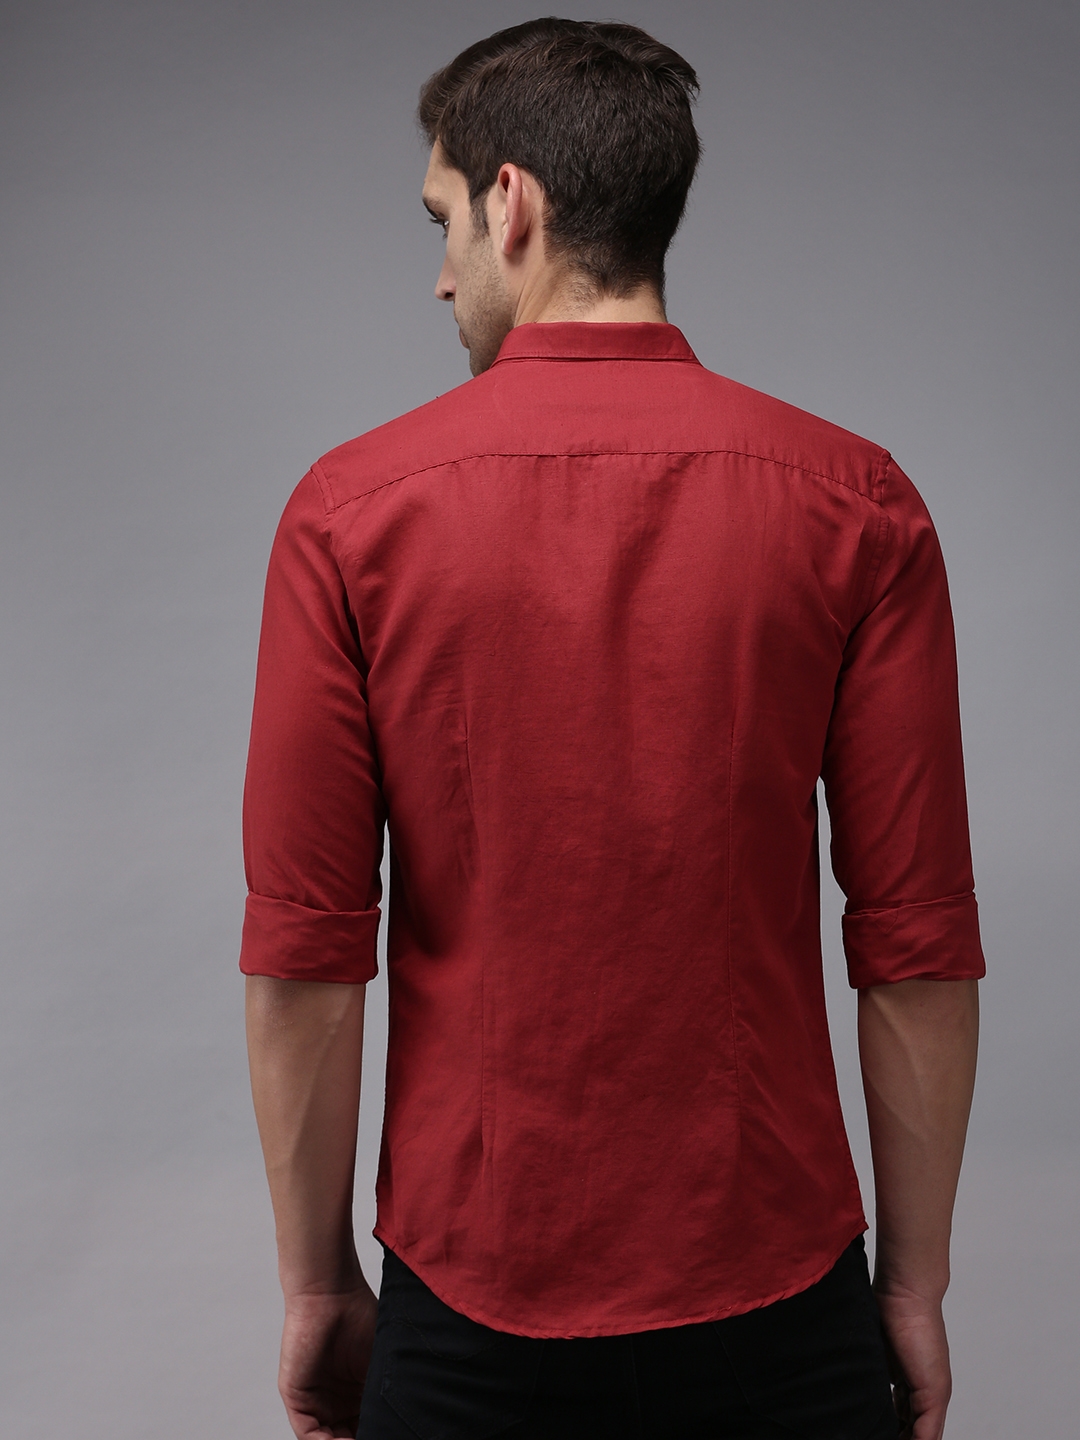 Men's Red Cotton Solid Casual Shirts